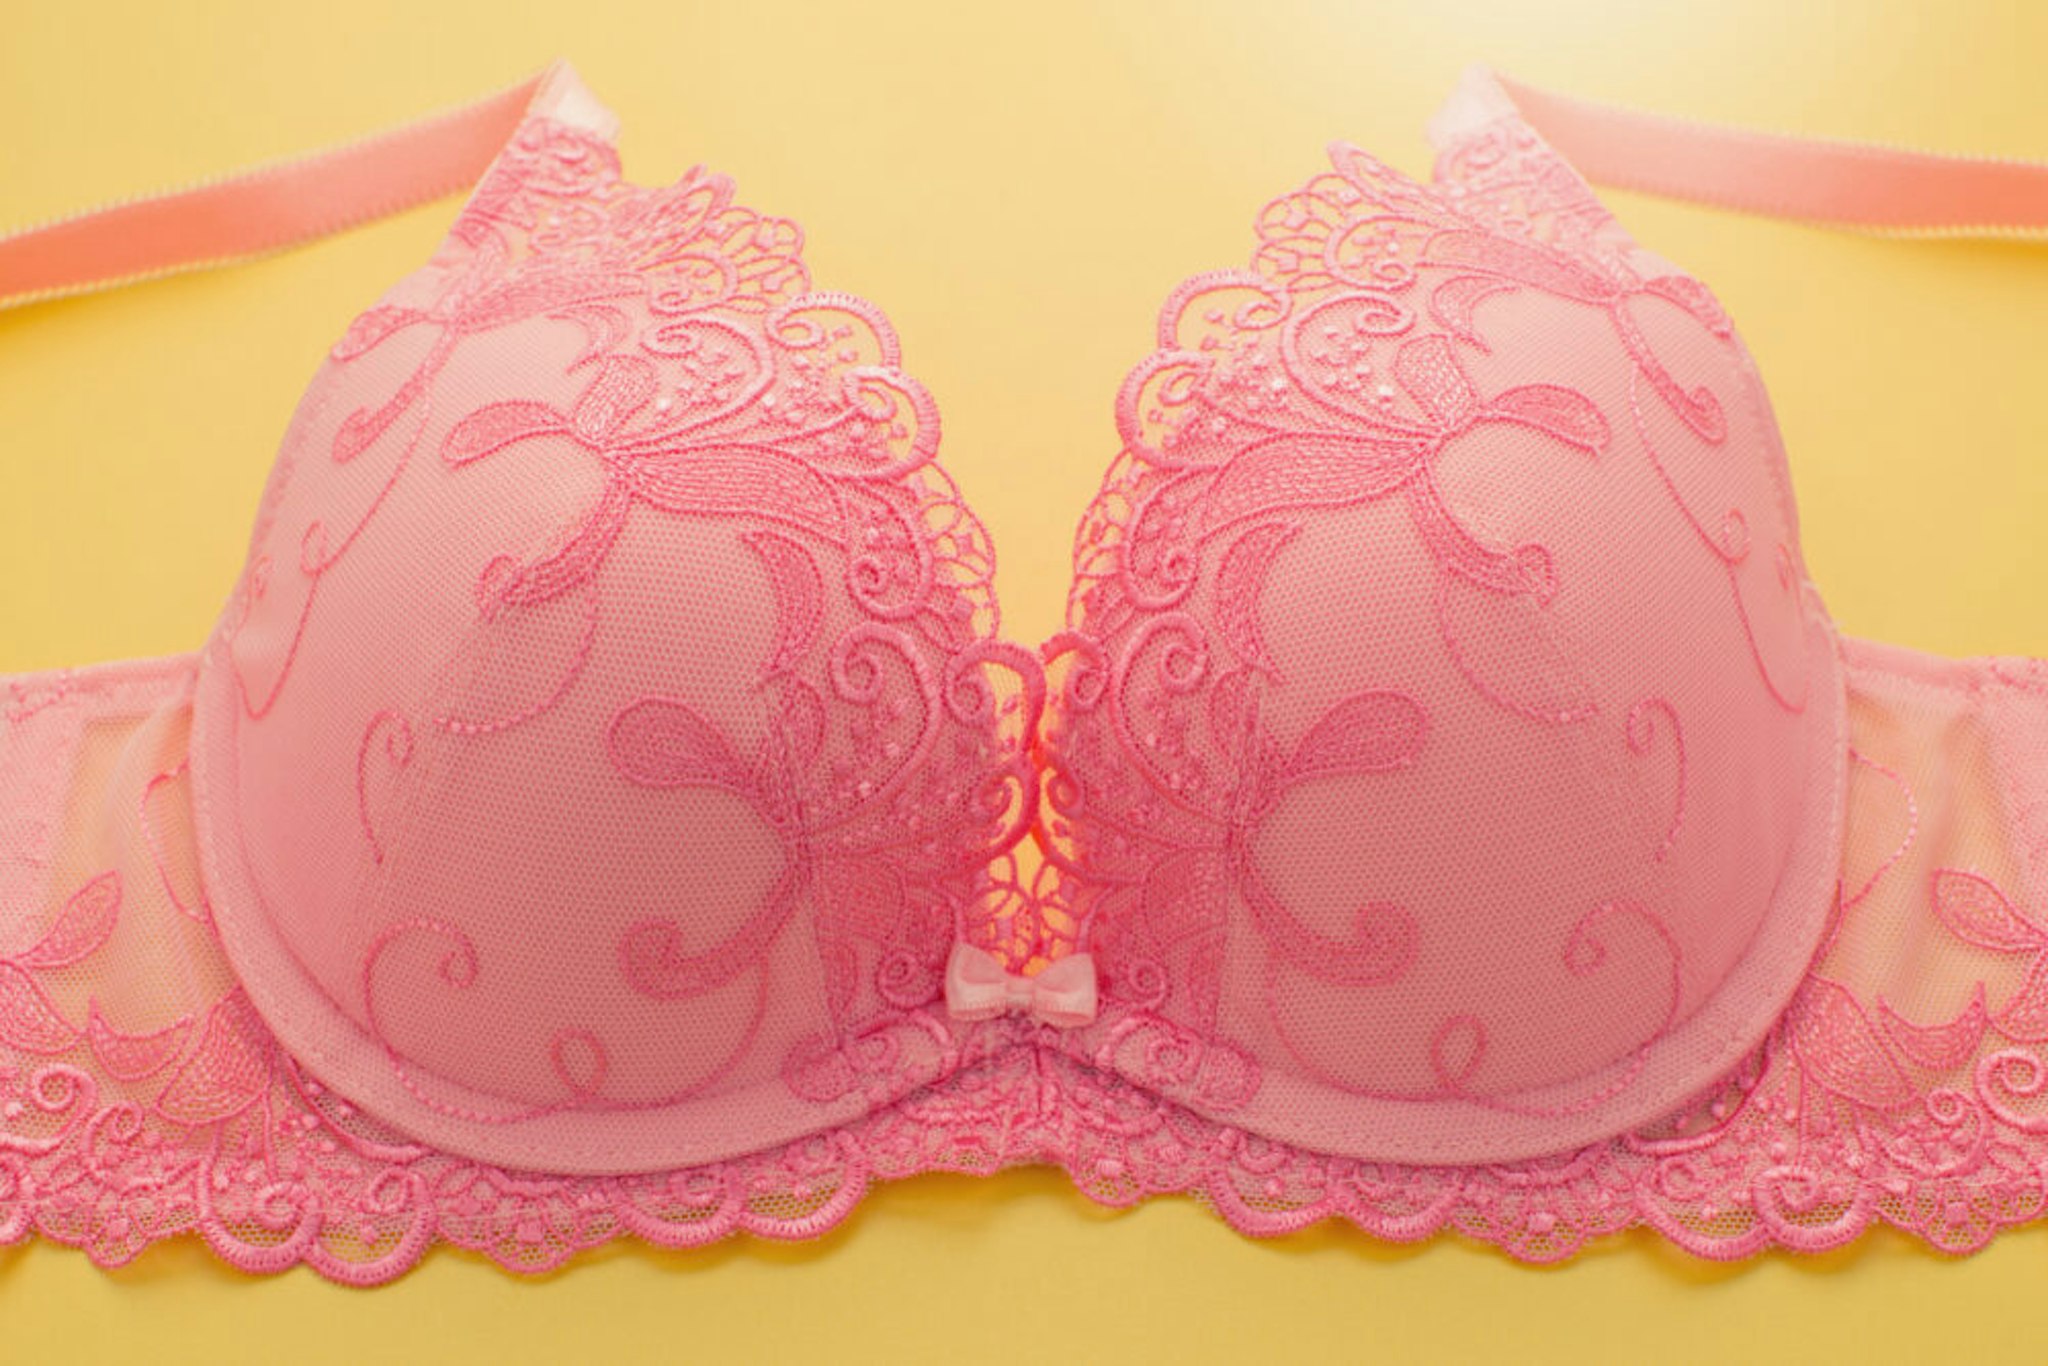 Close-Up Of Pink Bra Against Yellow Background - stock photo